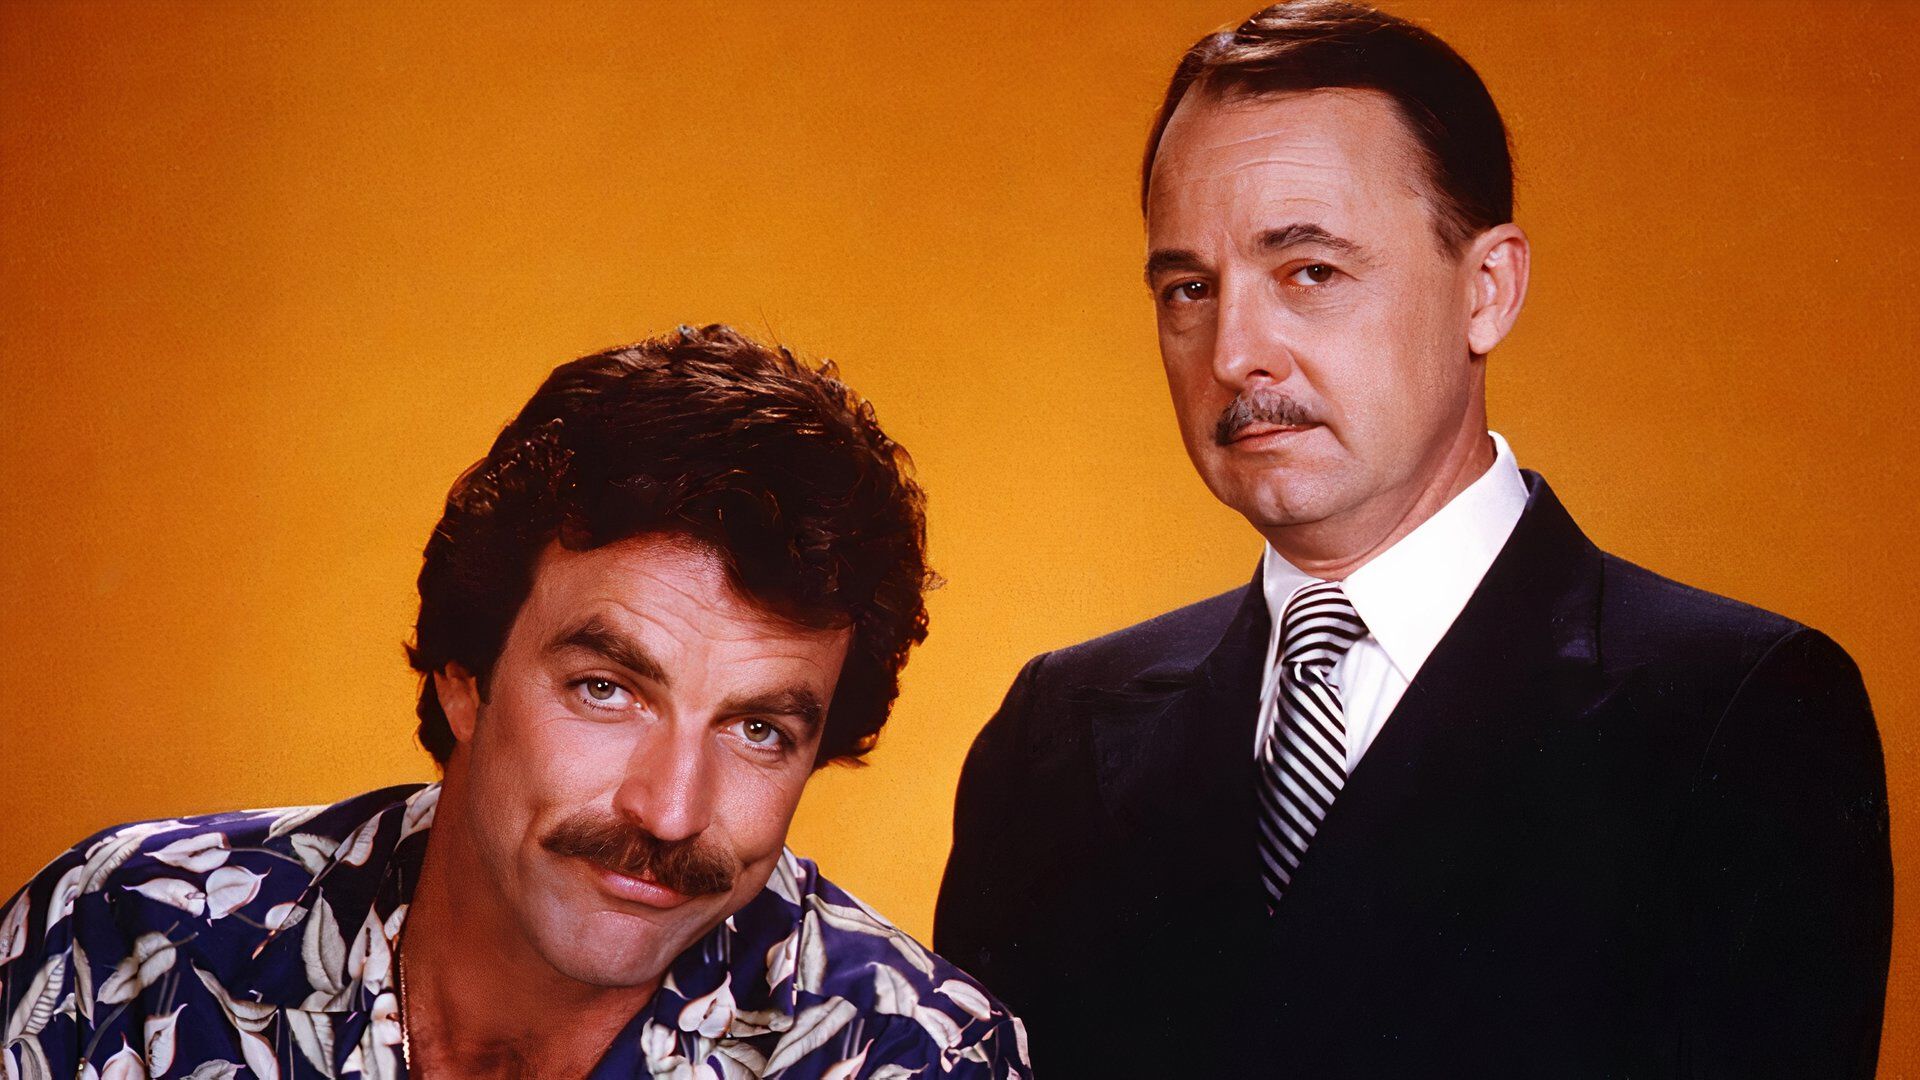 Tom Selleck as Thomas Magnum with man in tie